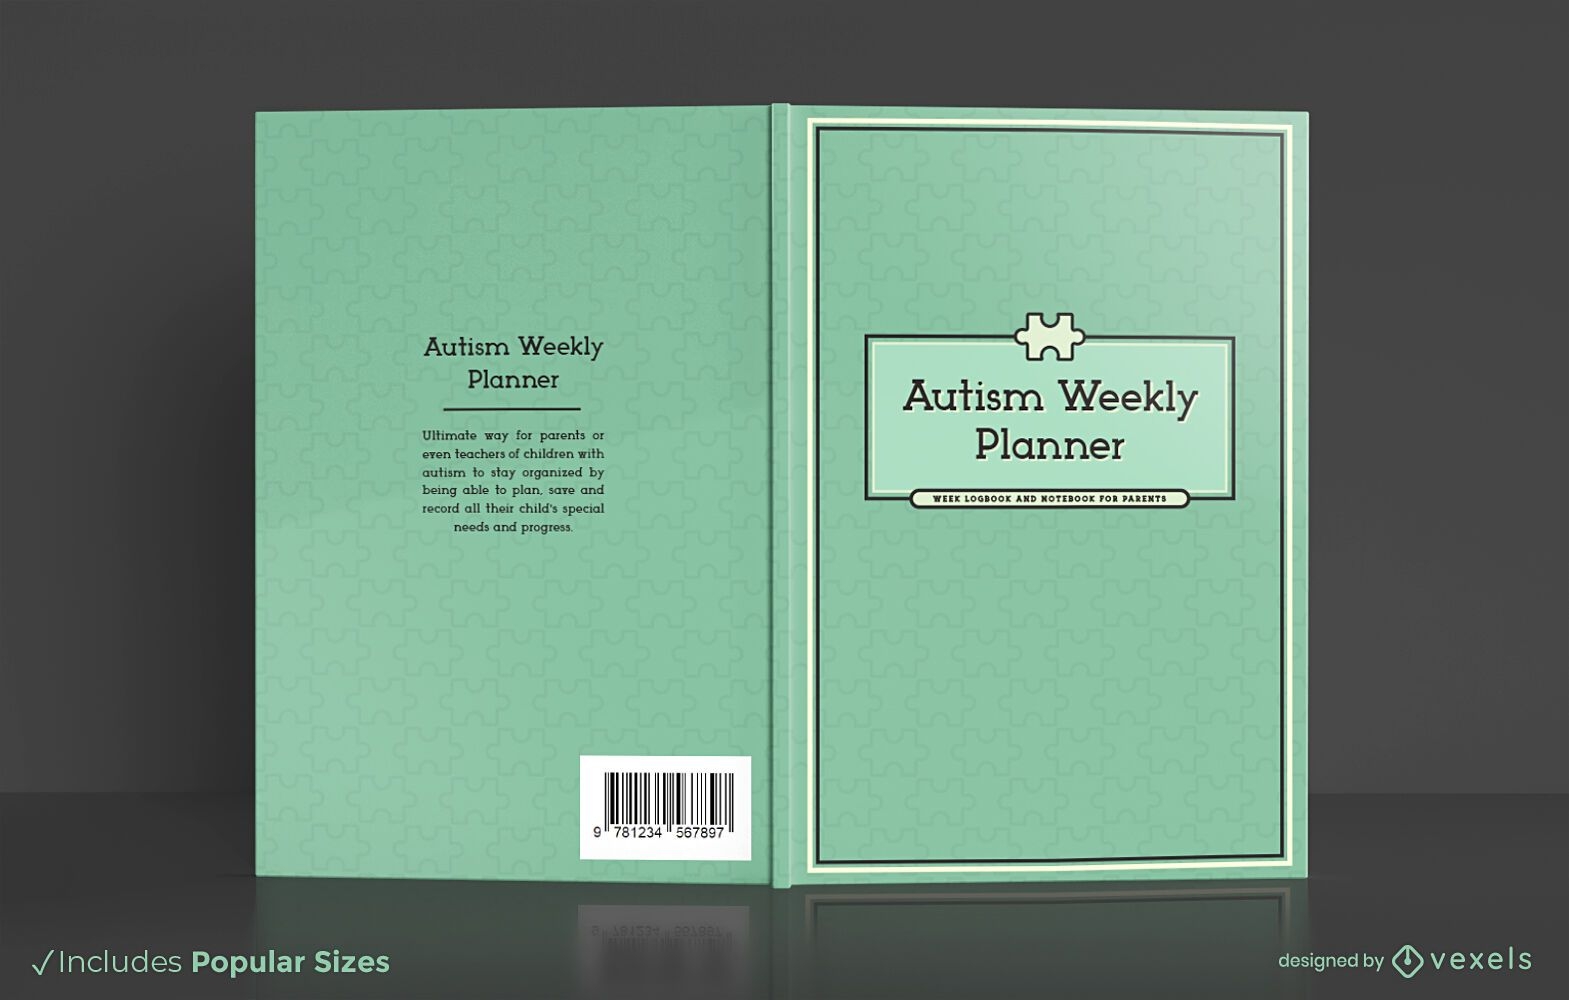 Autism weekly planner book cover design